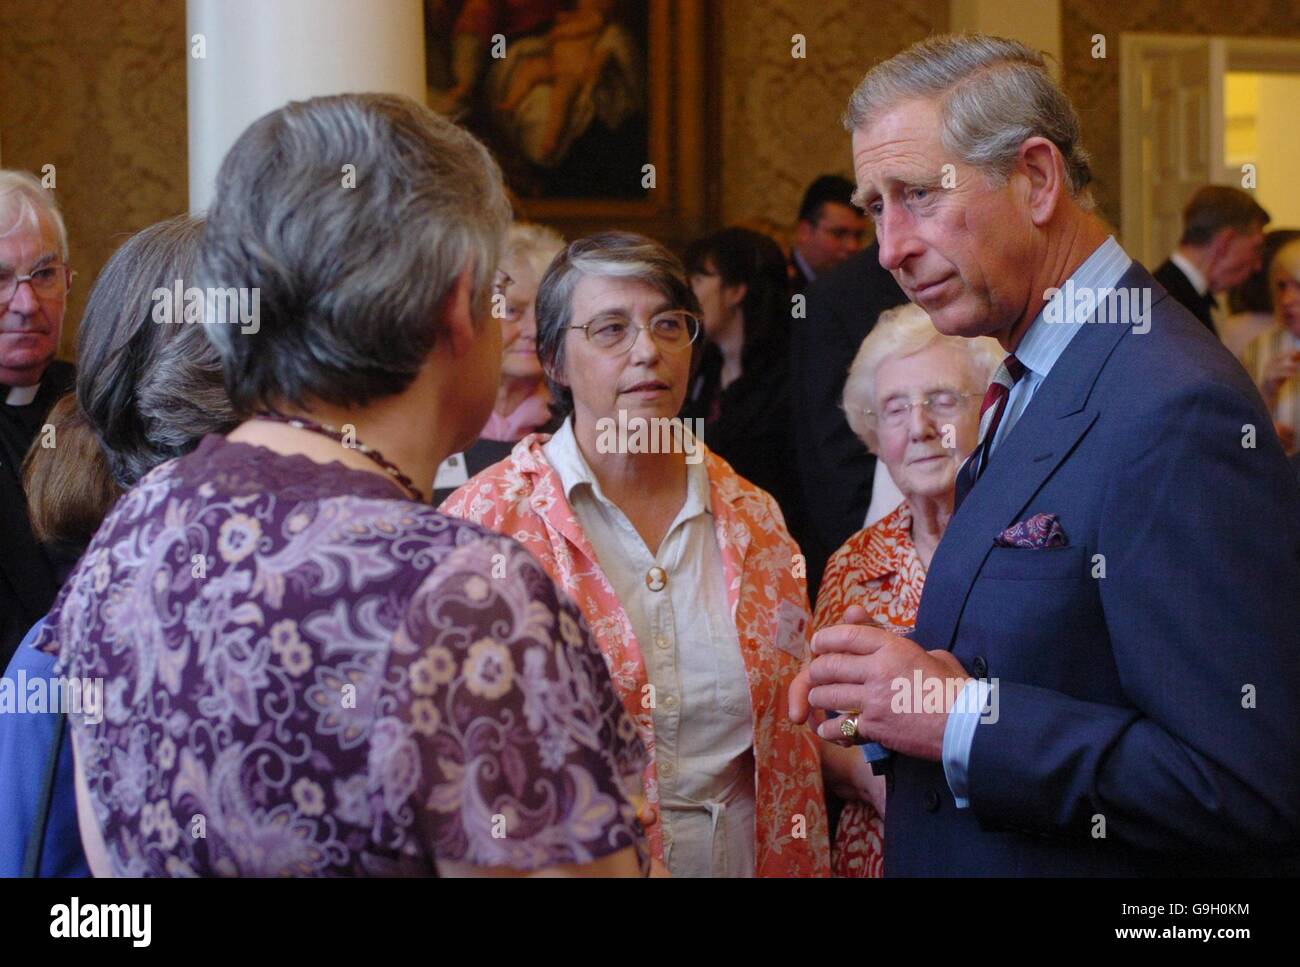 The Prince of Wales meets members of The Prayer Book Society, shortly before he was due to give the inaugural address at its Annual Conference during an evening reception at Lady Margaret Hall in Oxford, Oxfordshire. Stock Photo